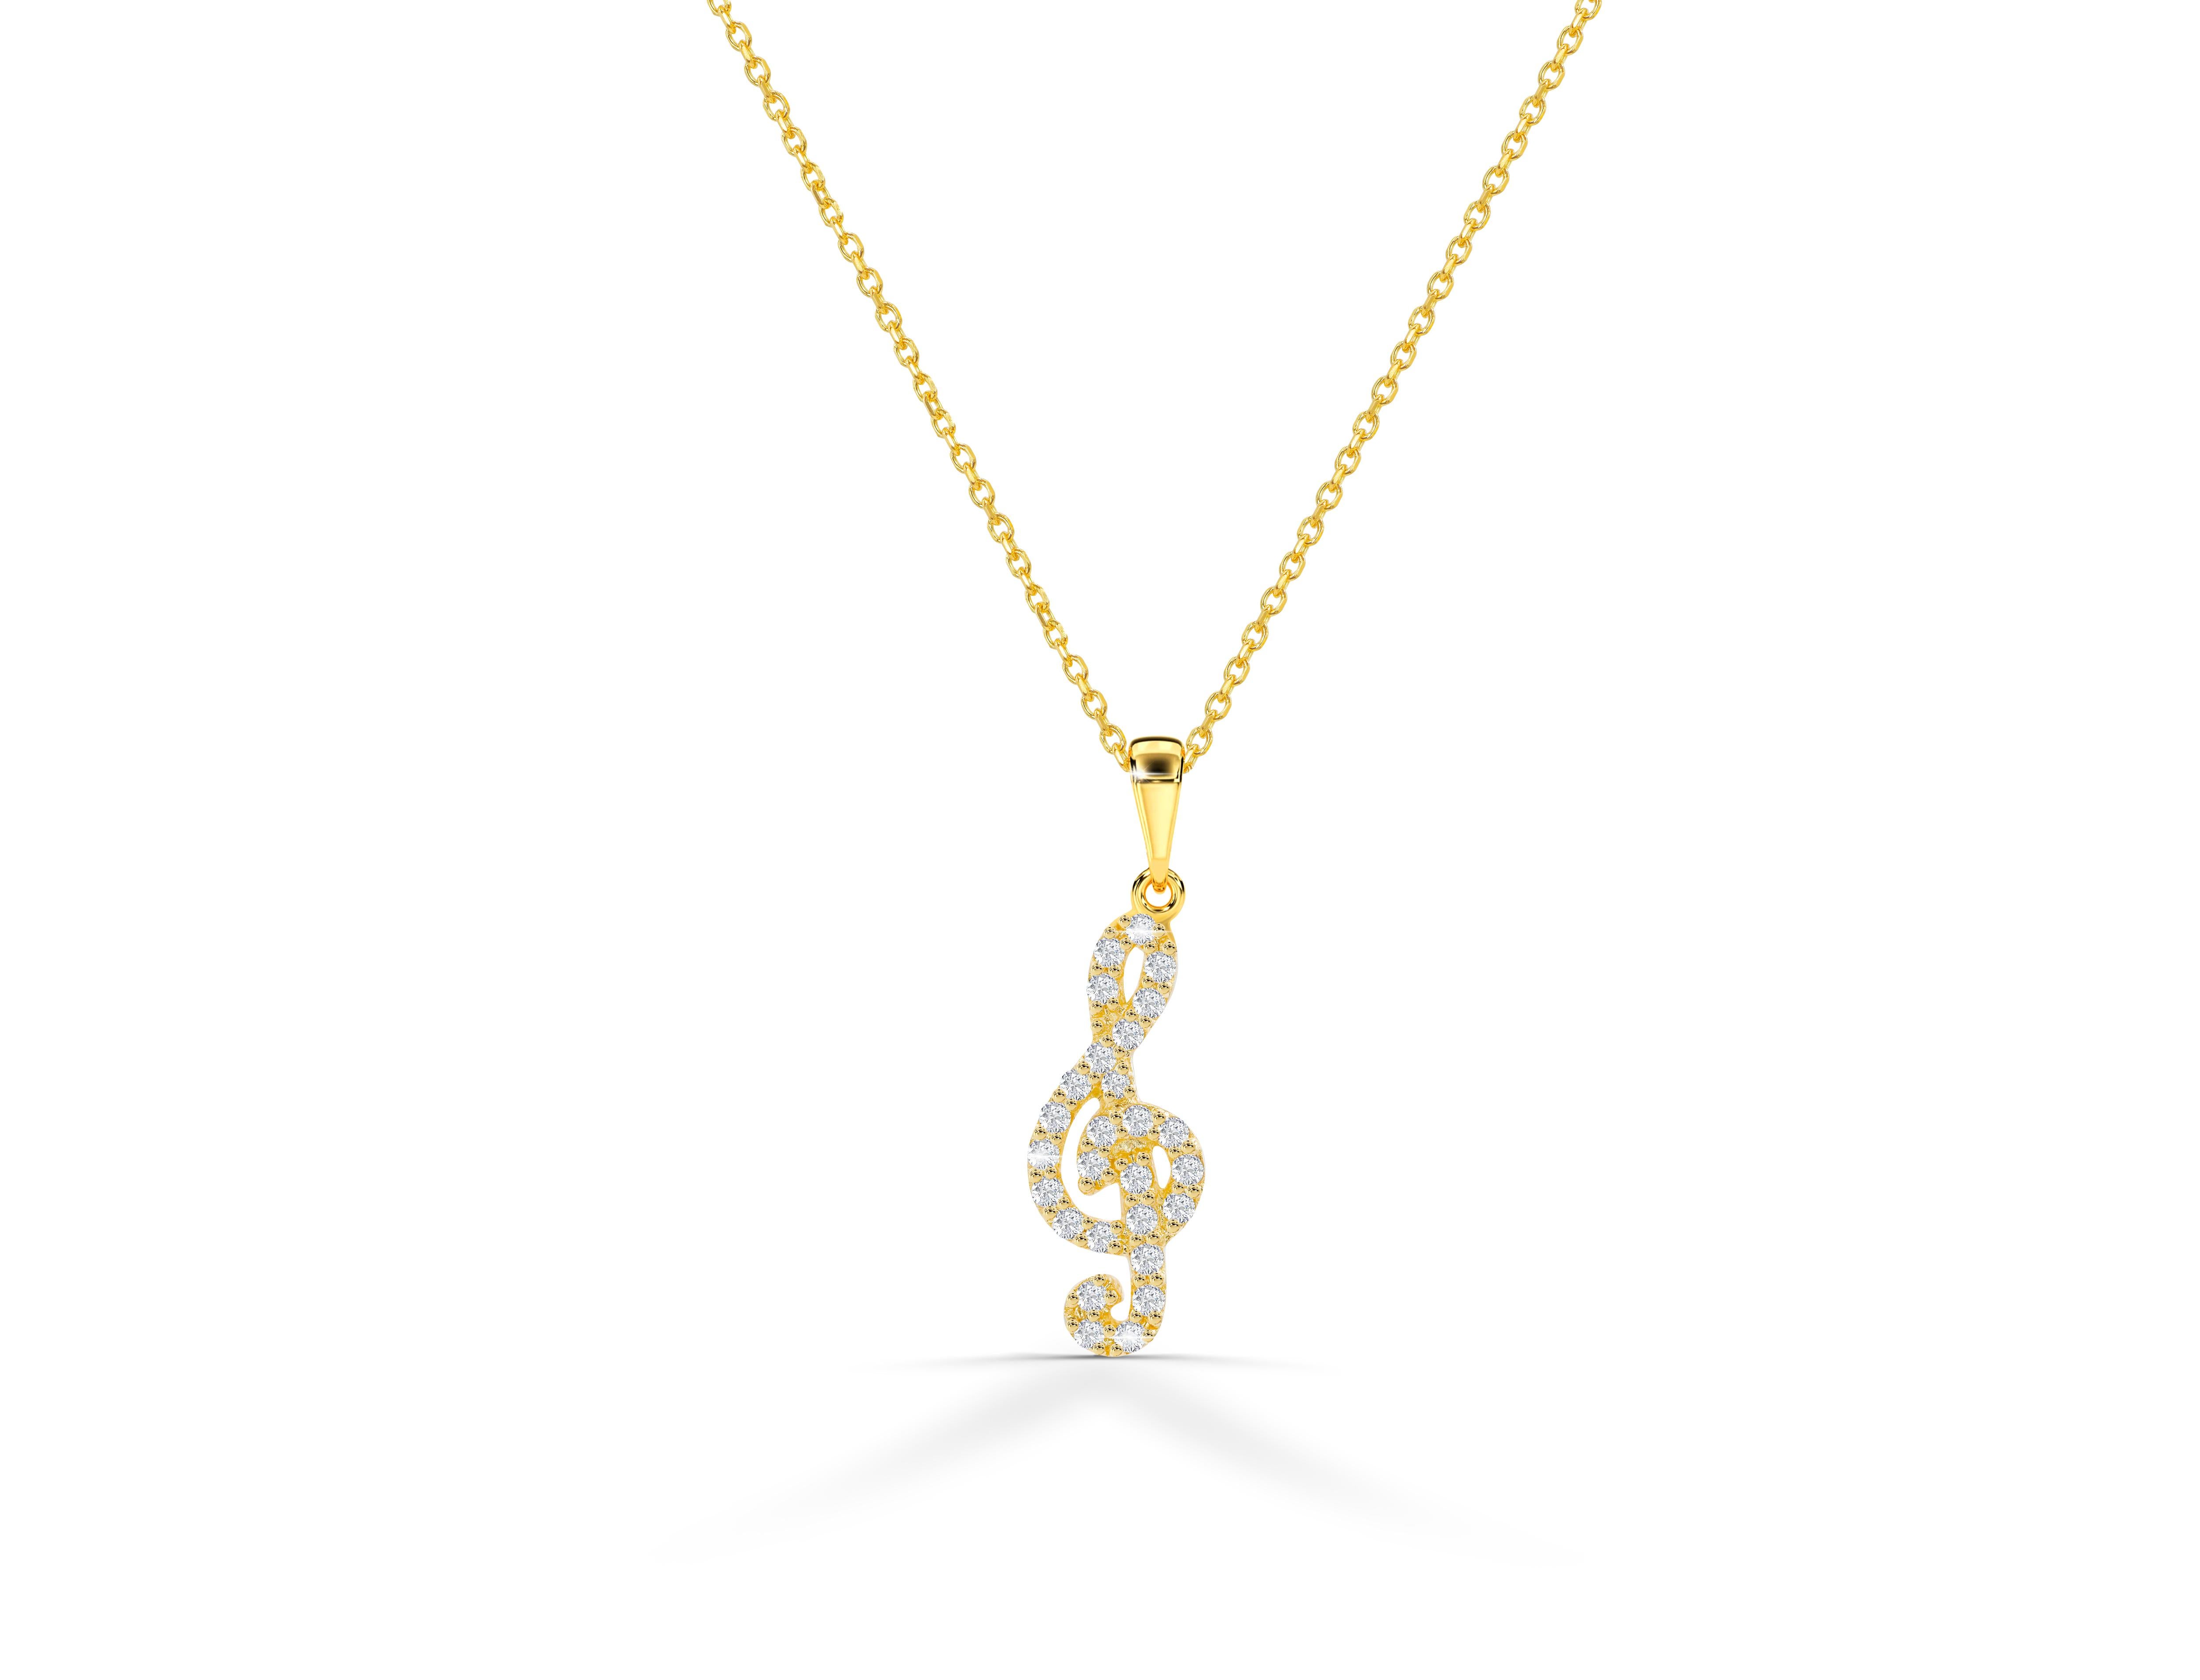 Diamond Music Note Necklace in 18k Yellow Gold / White Gold / Rose Gold.

Delicate Dainty Music Note charm necklace with natural diamond set in 18k Gold. This modern minimalist necklace is a perfect gift for a musician / Guitarist / music lover